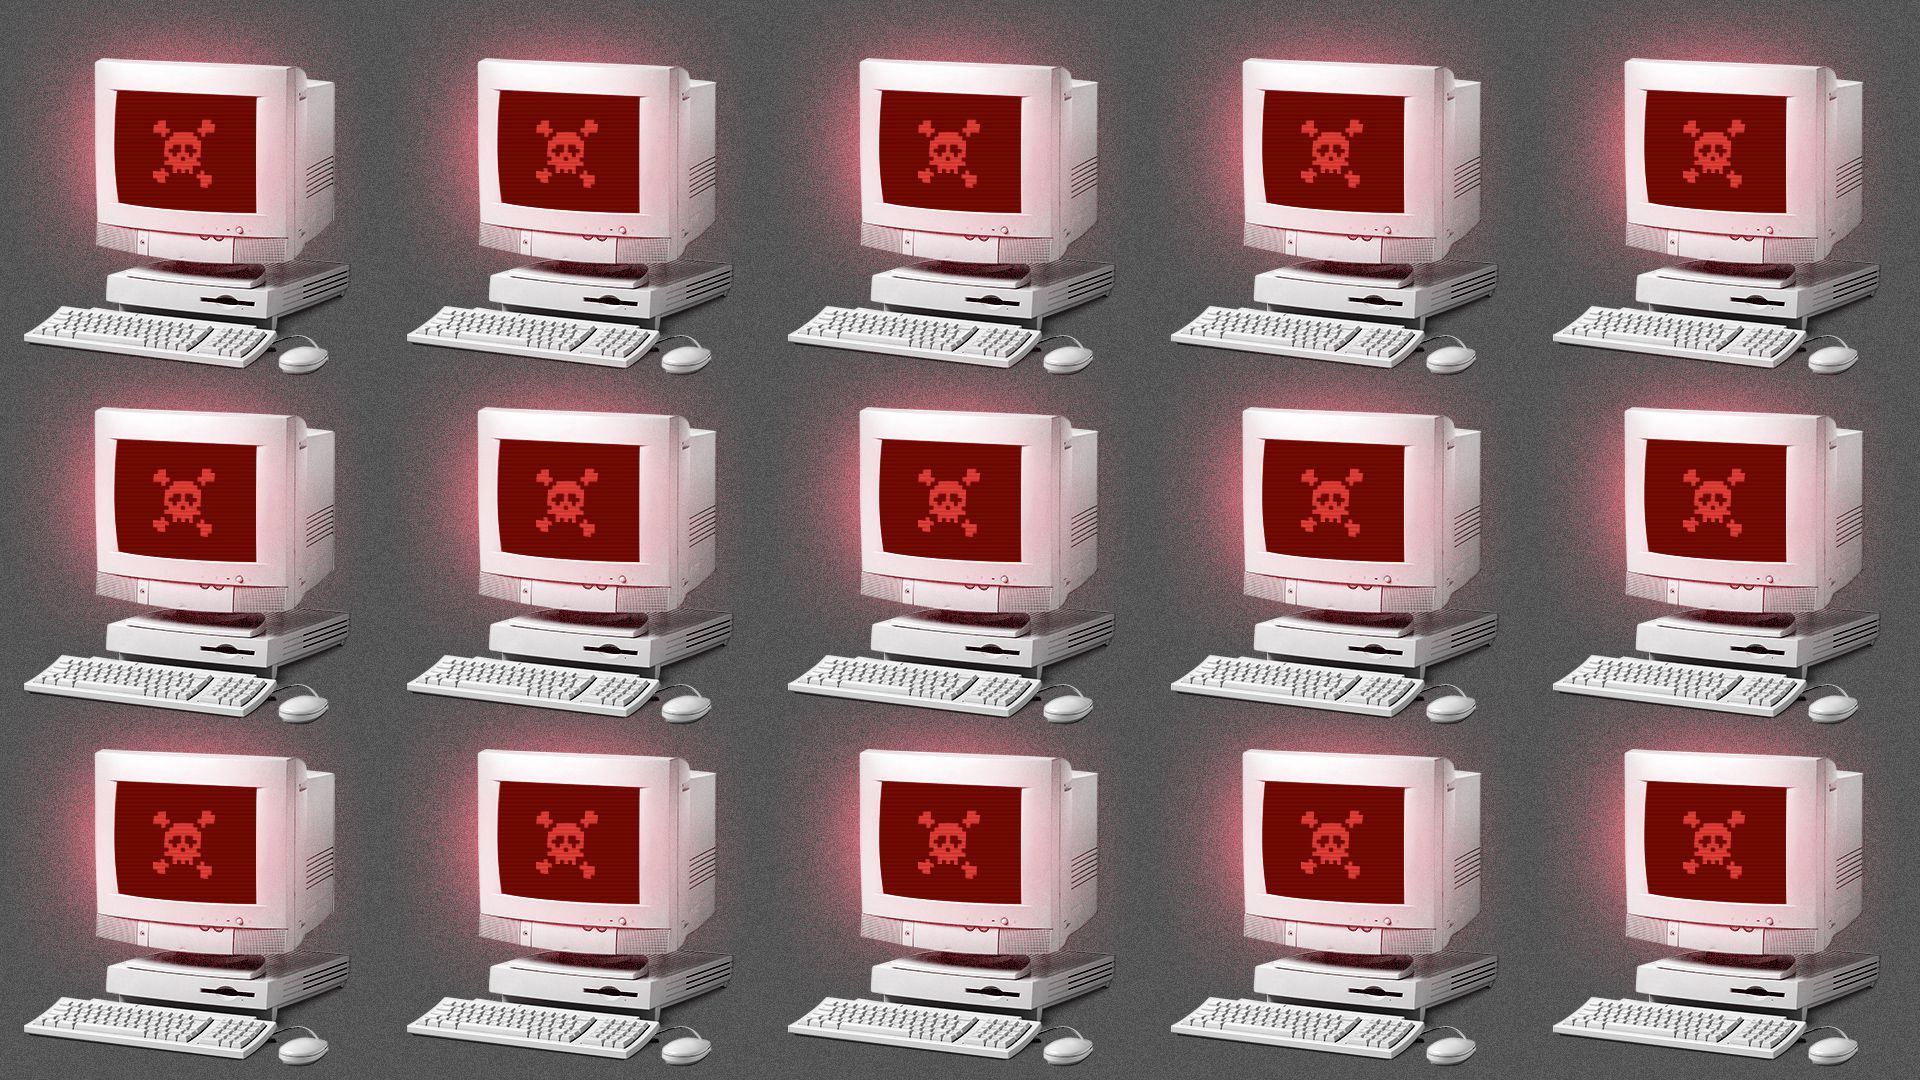 Computers with ransomware signs